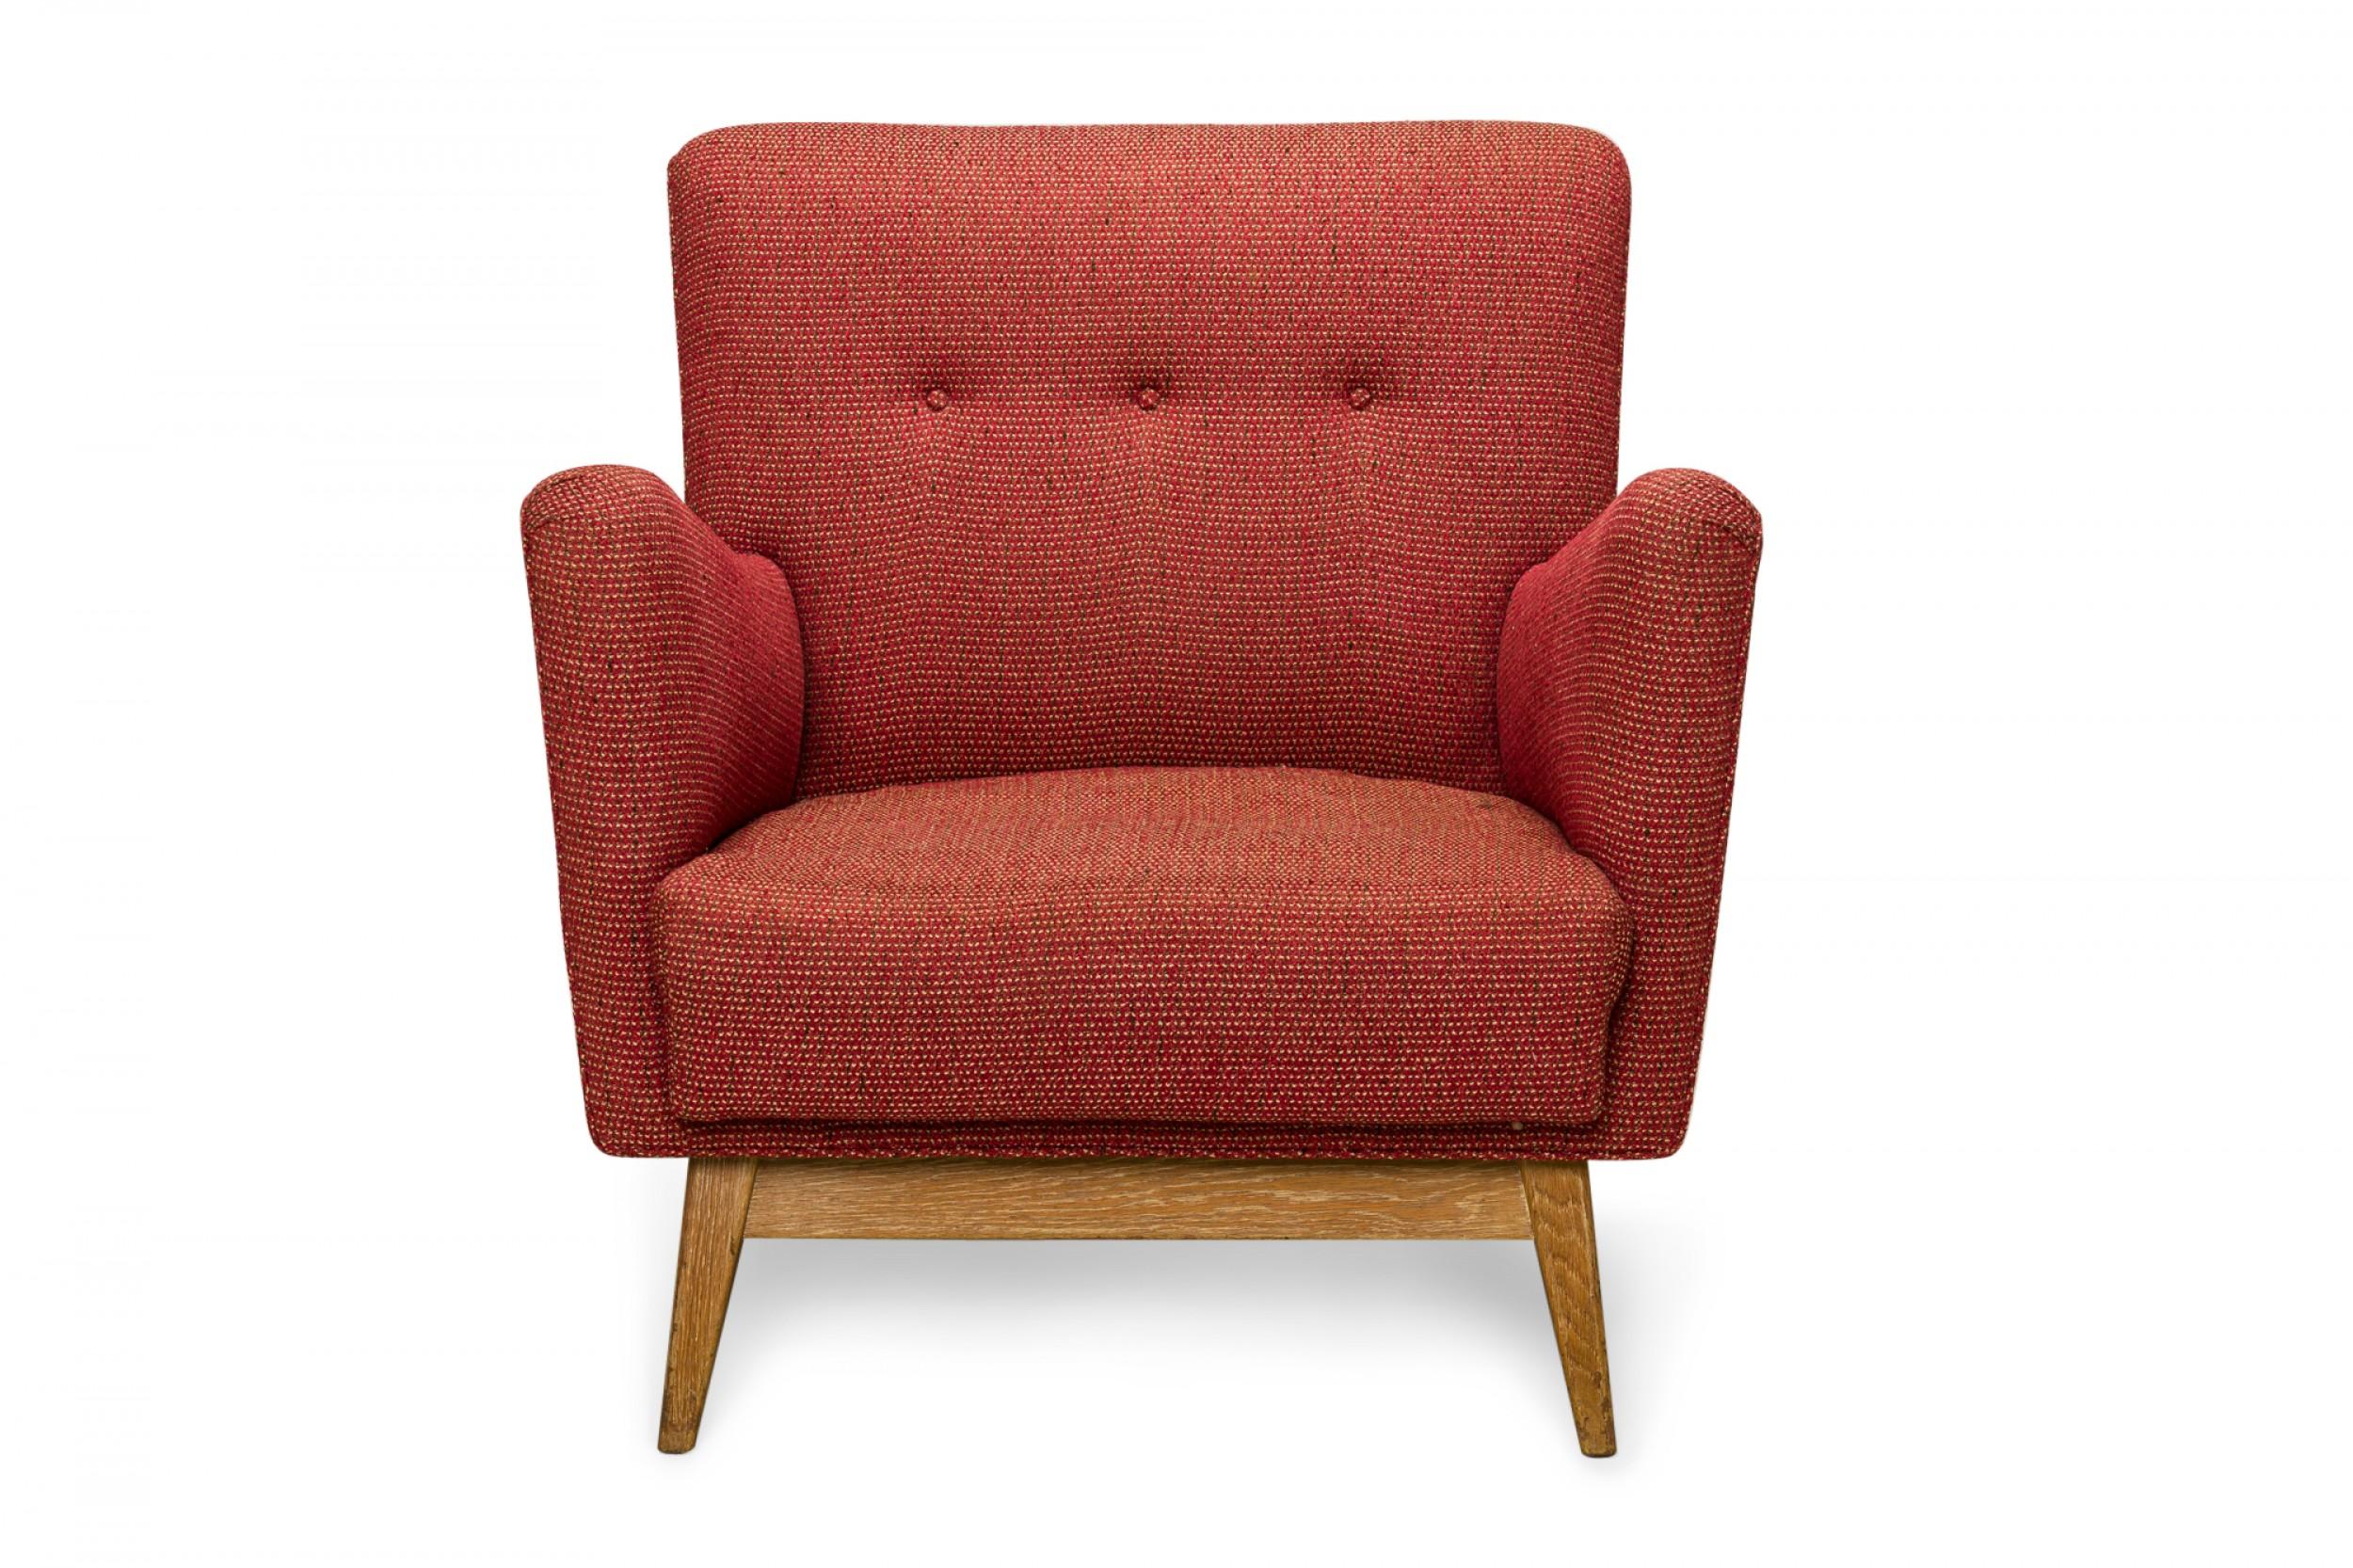 Danish mid-century lounge armchair with angled armrests and a square back, upholstered in a woven red fabric upholstery with button tufting, resting on a blonde wood base with four rounded tapered legs. (JENS RISOM)
 